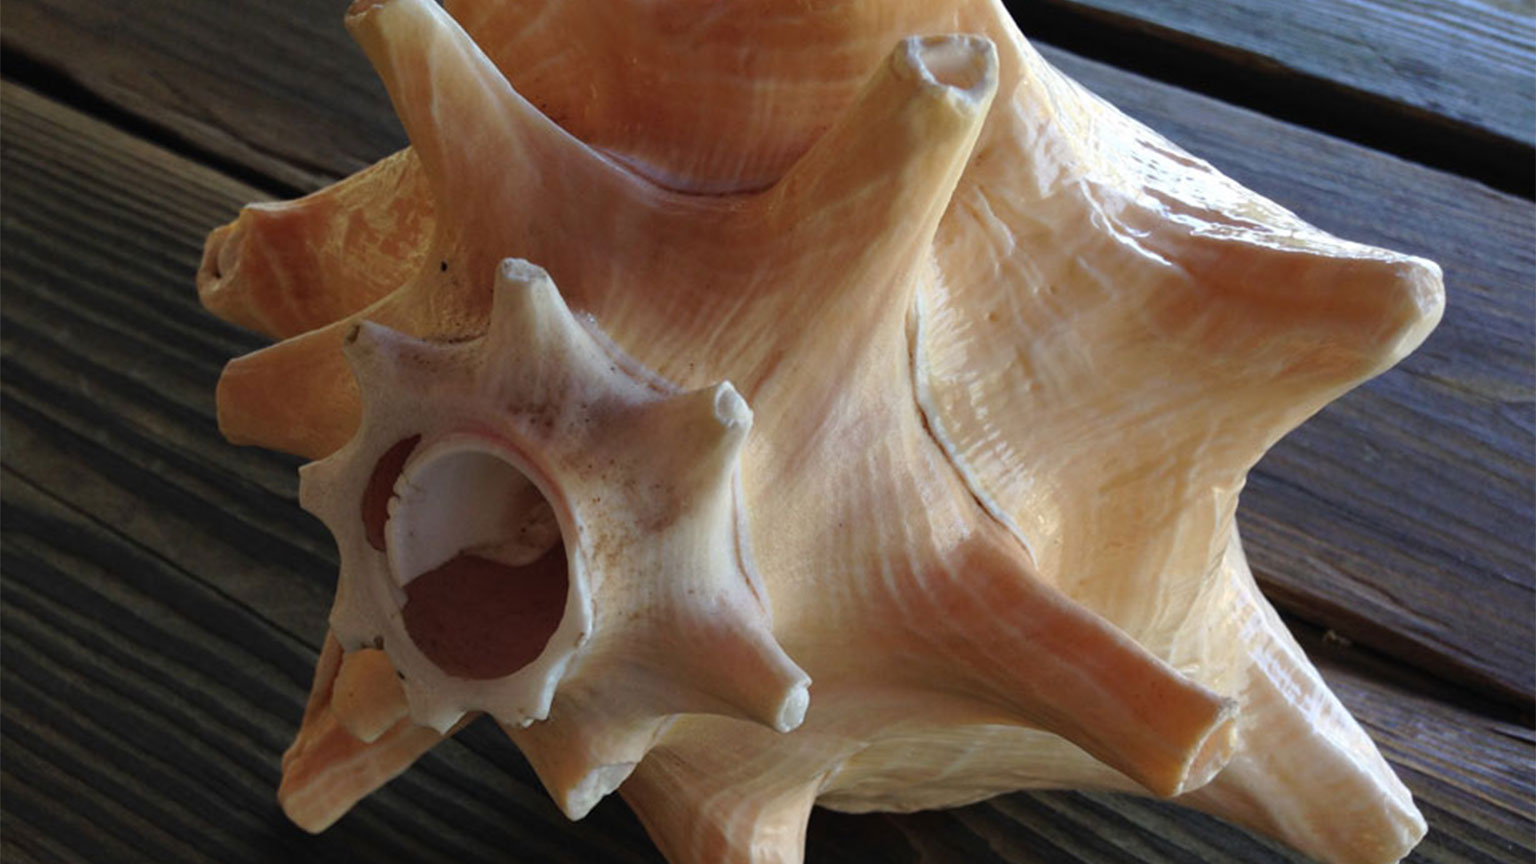 This is what the conch shell looks like once the tip has been cut off to create the horn. That is where a captain would put his mouth to blow air through the shell creating a horn sound.